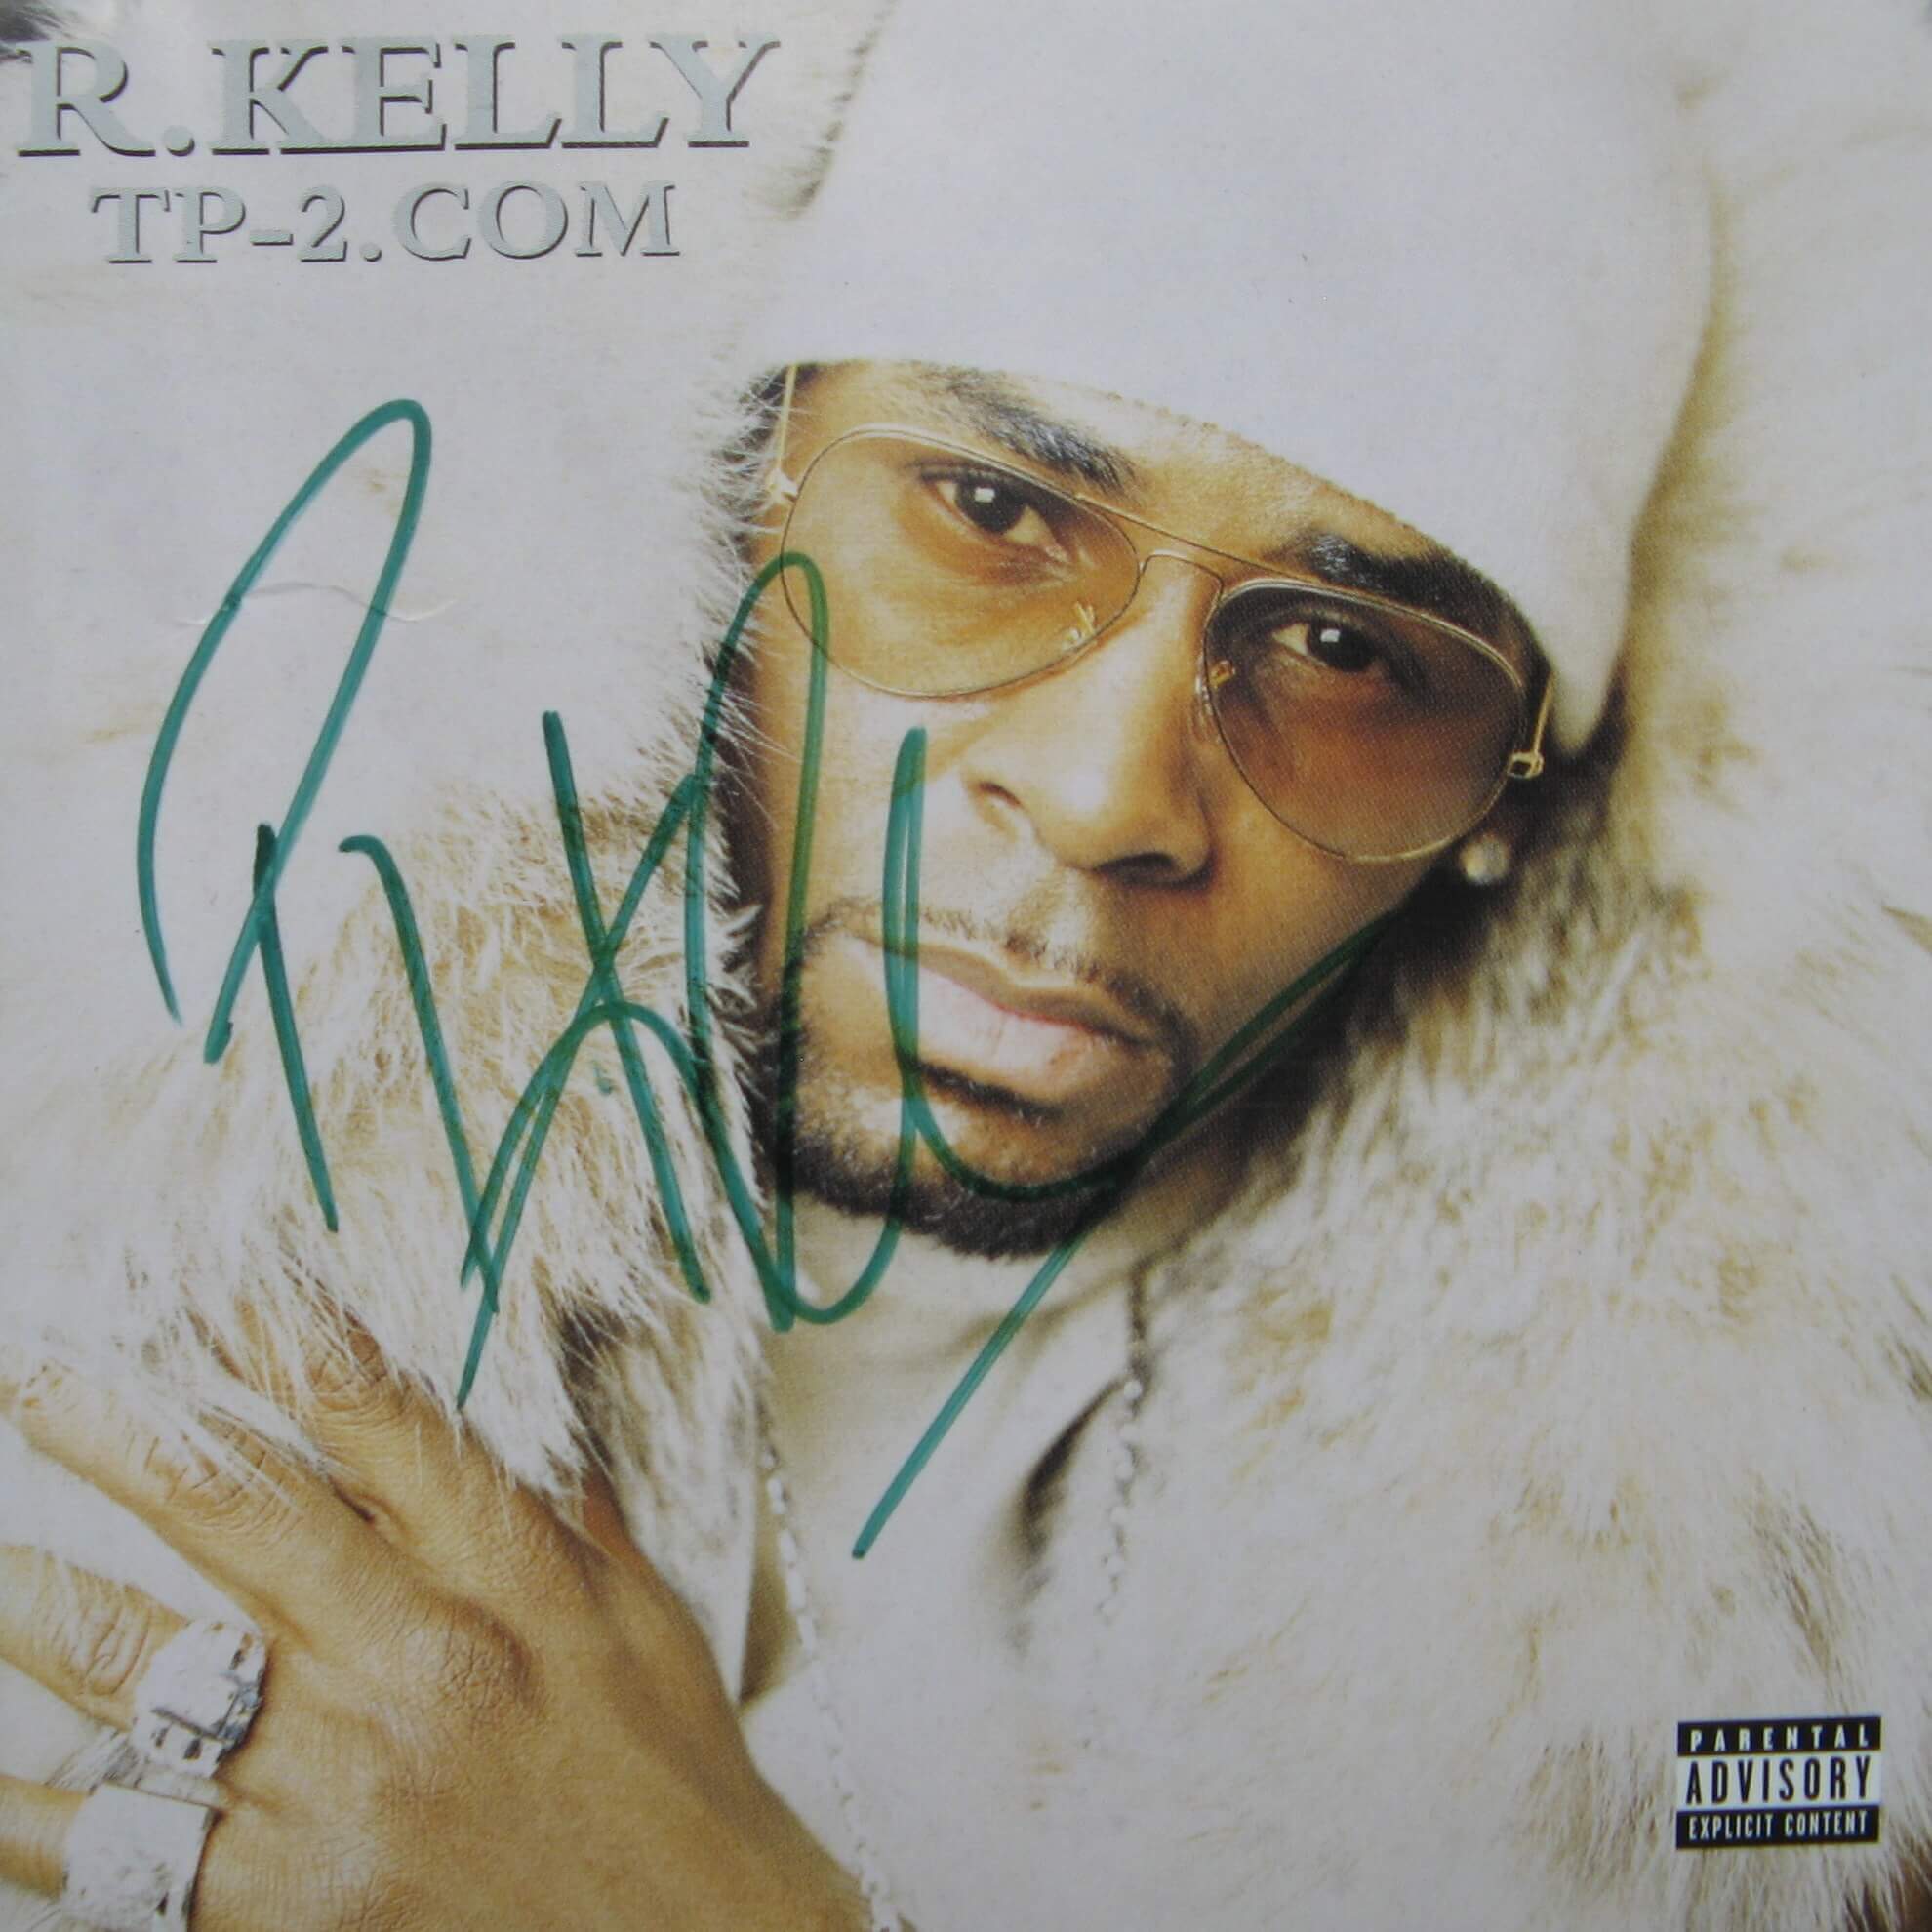 r kelly trapped in the closet full album zip